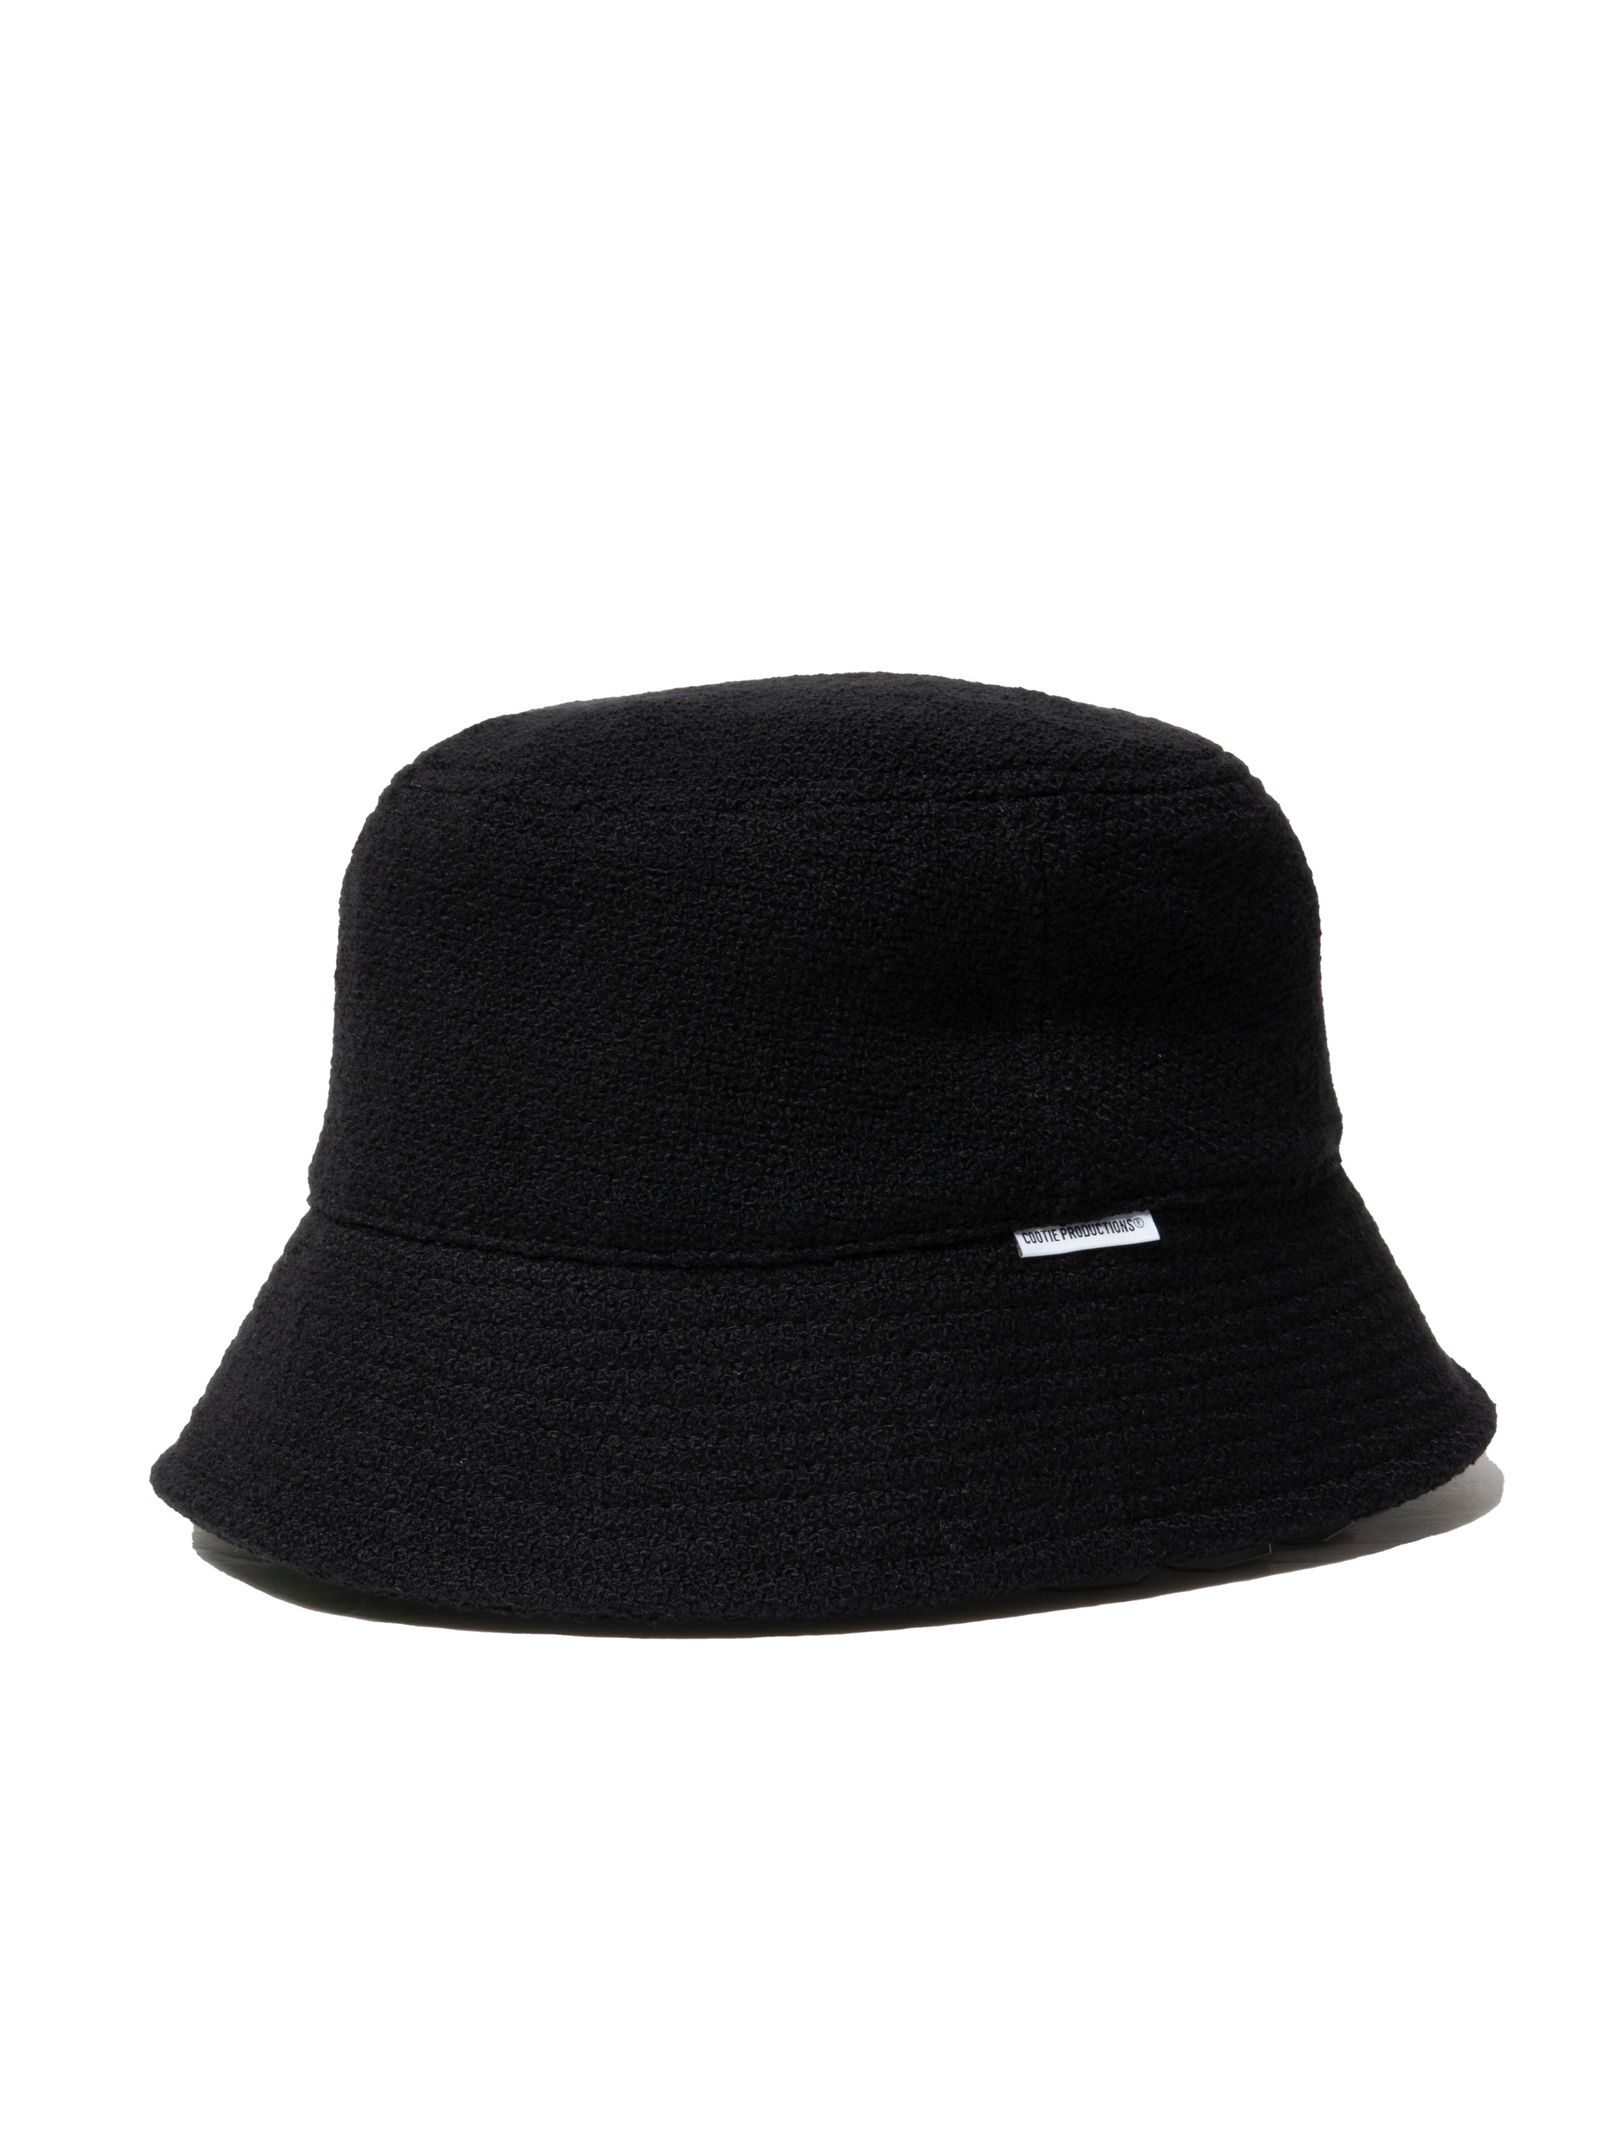 COOTIE PRODUCTIONS - N/C OX Bucket Hat / Black / バケットハット 